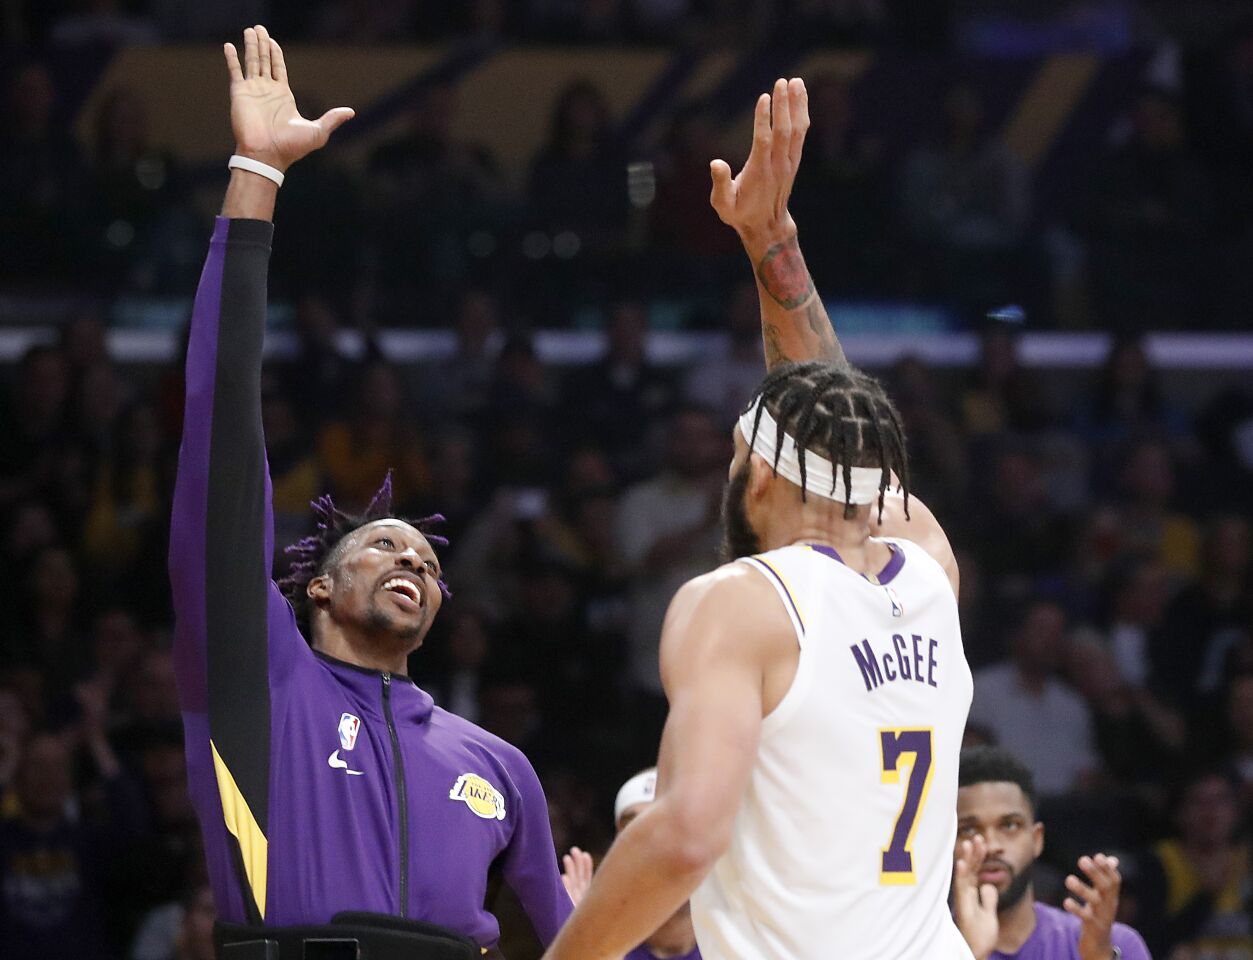 Lakers big men Dwight Howard, left, and JaVale McGee celebrate after a basket by McGee.